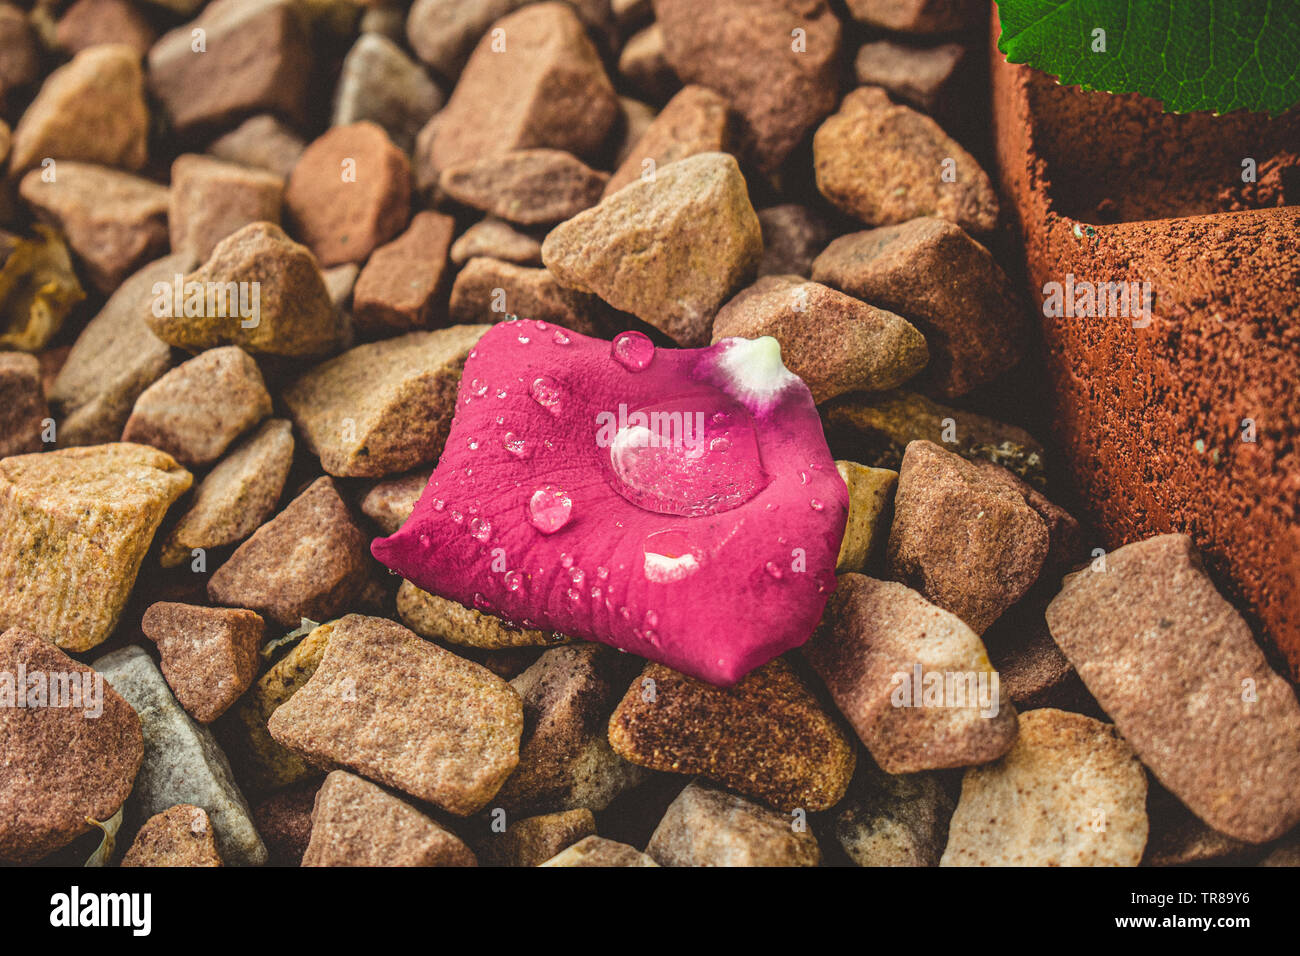 Rose Petal With Water Droplets Resting on Bedrock Stock Photo